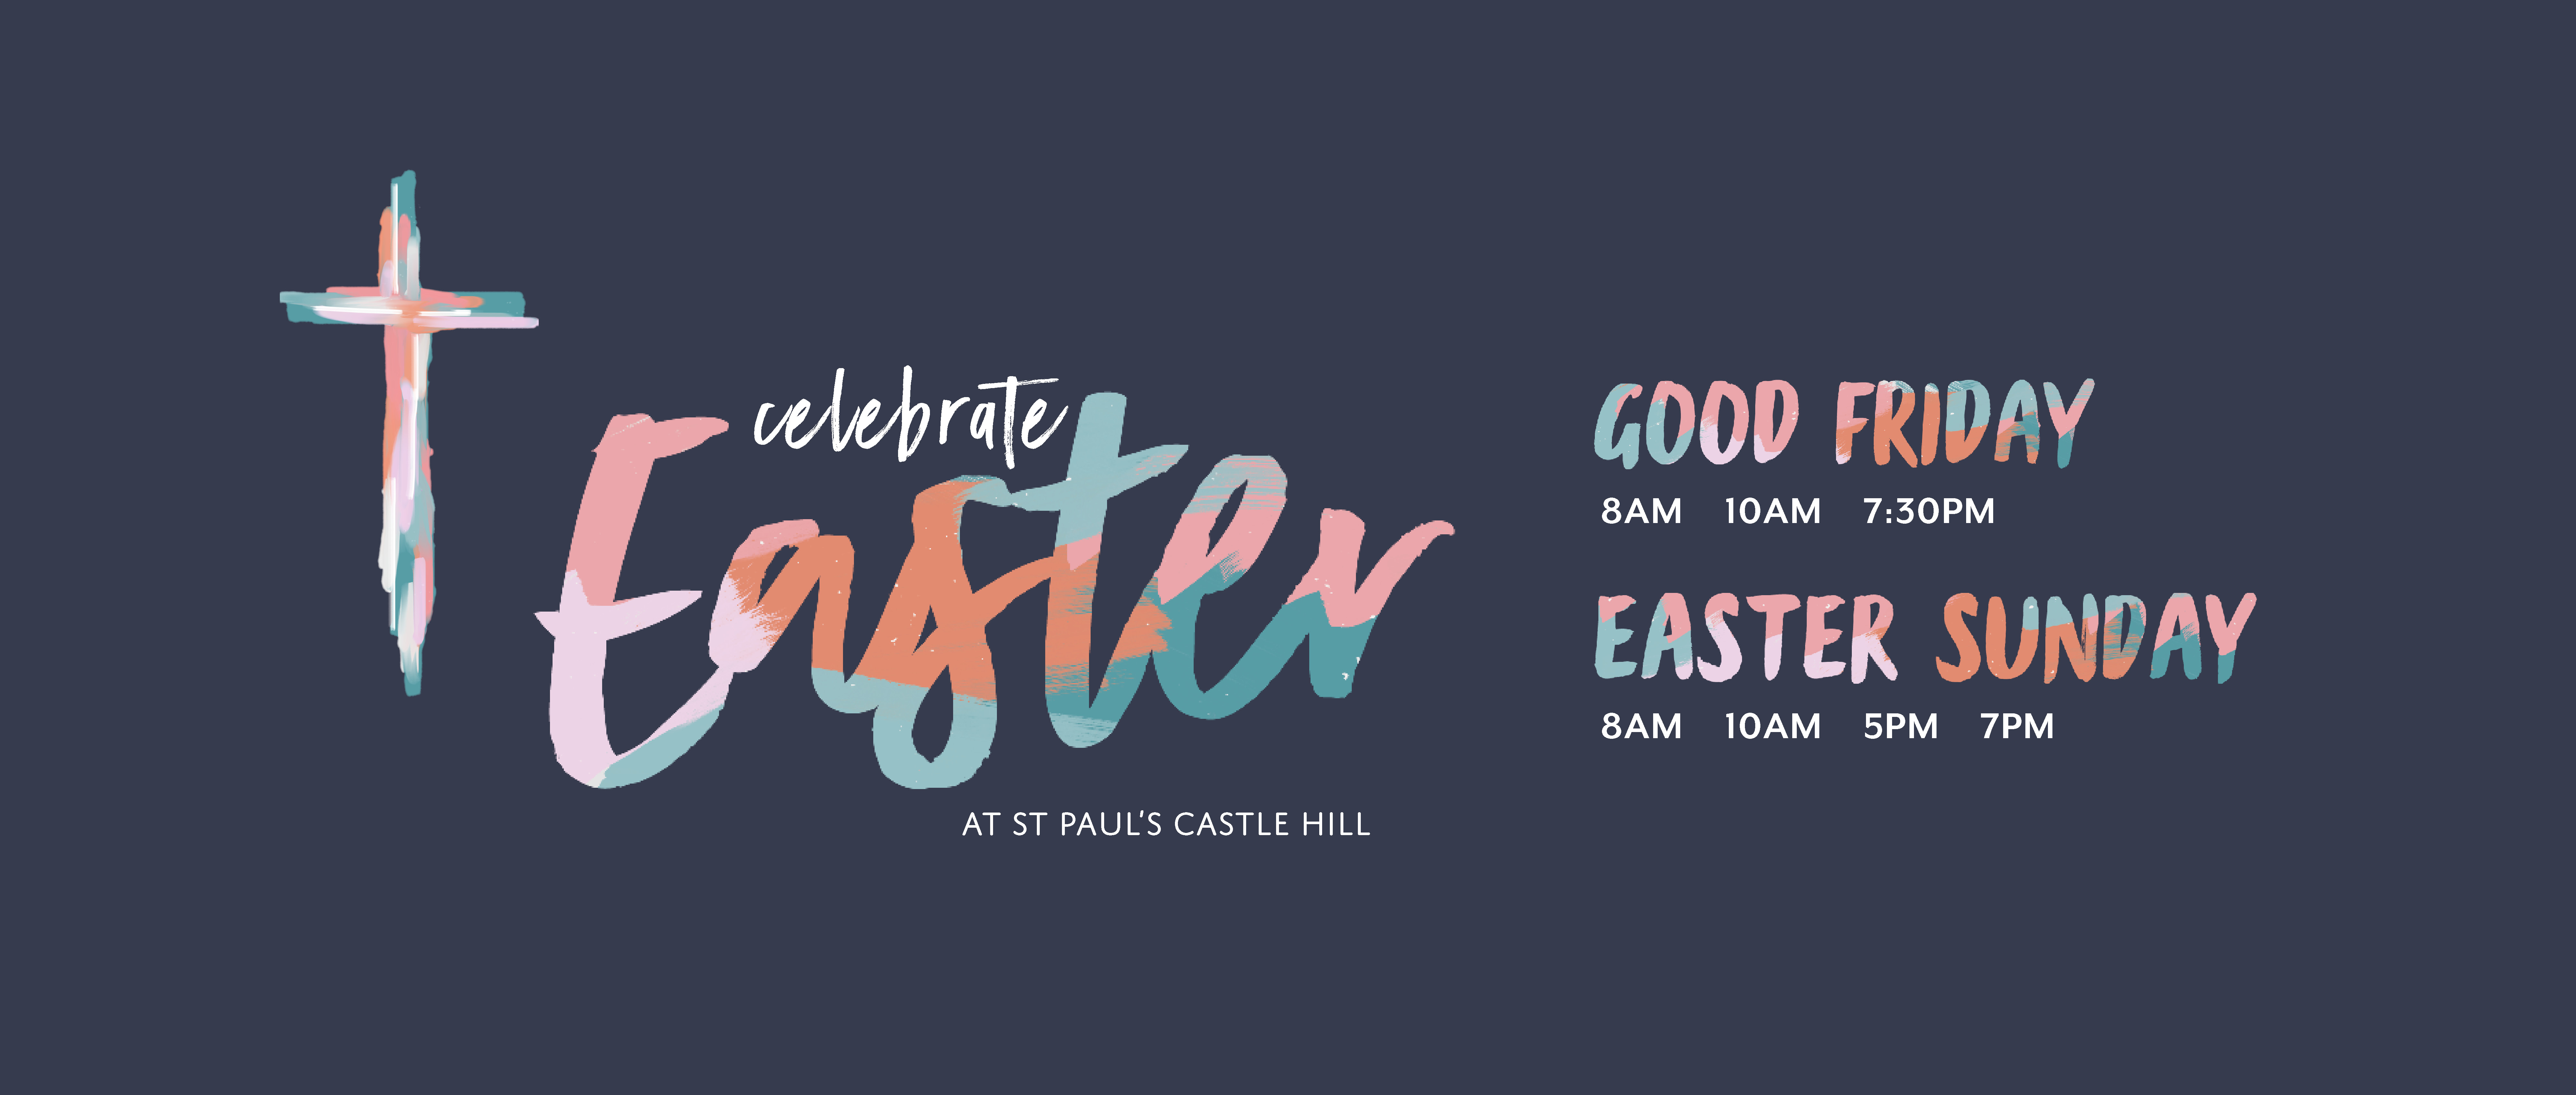 Easter Service Times St Paul's Anglican Church Castle Hill